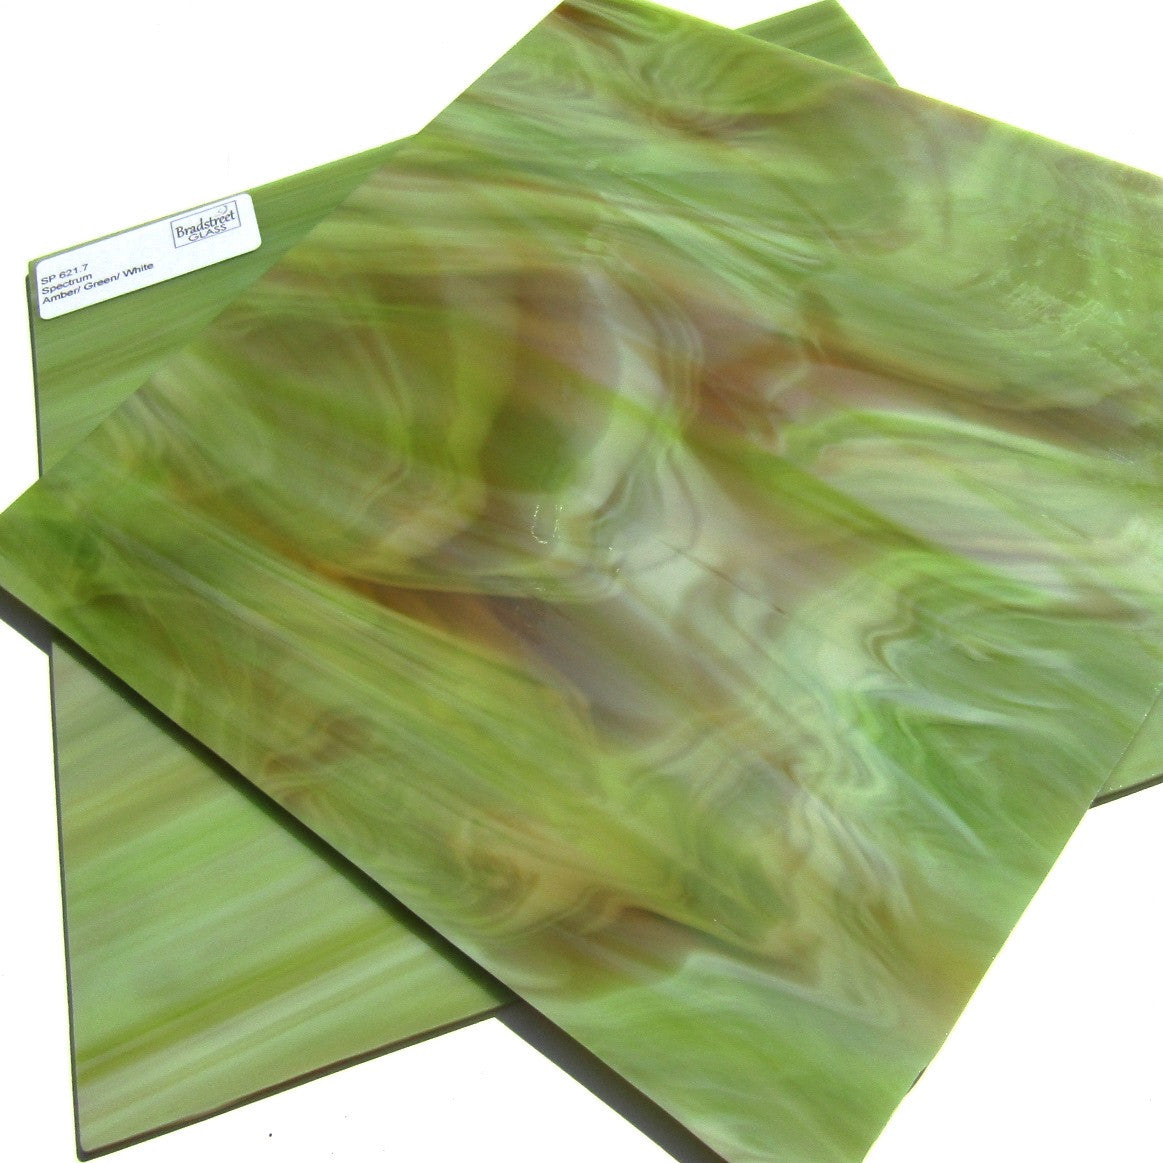 Spectrum 621.7 Stained Glass Sheet Opaque Streaky Swirled Amber Green White Opal